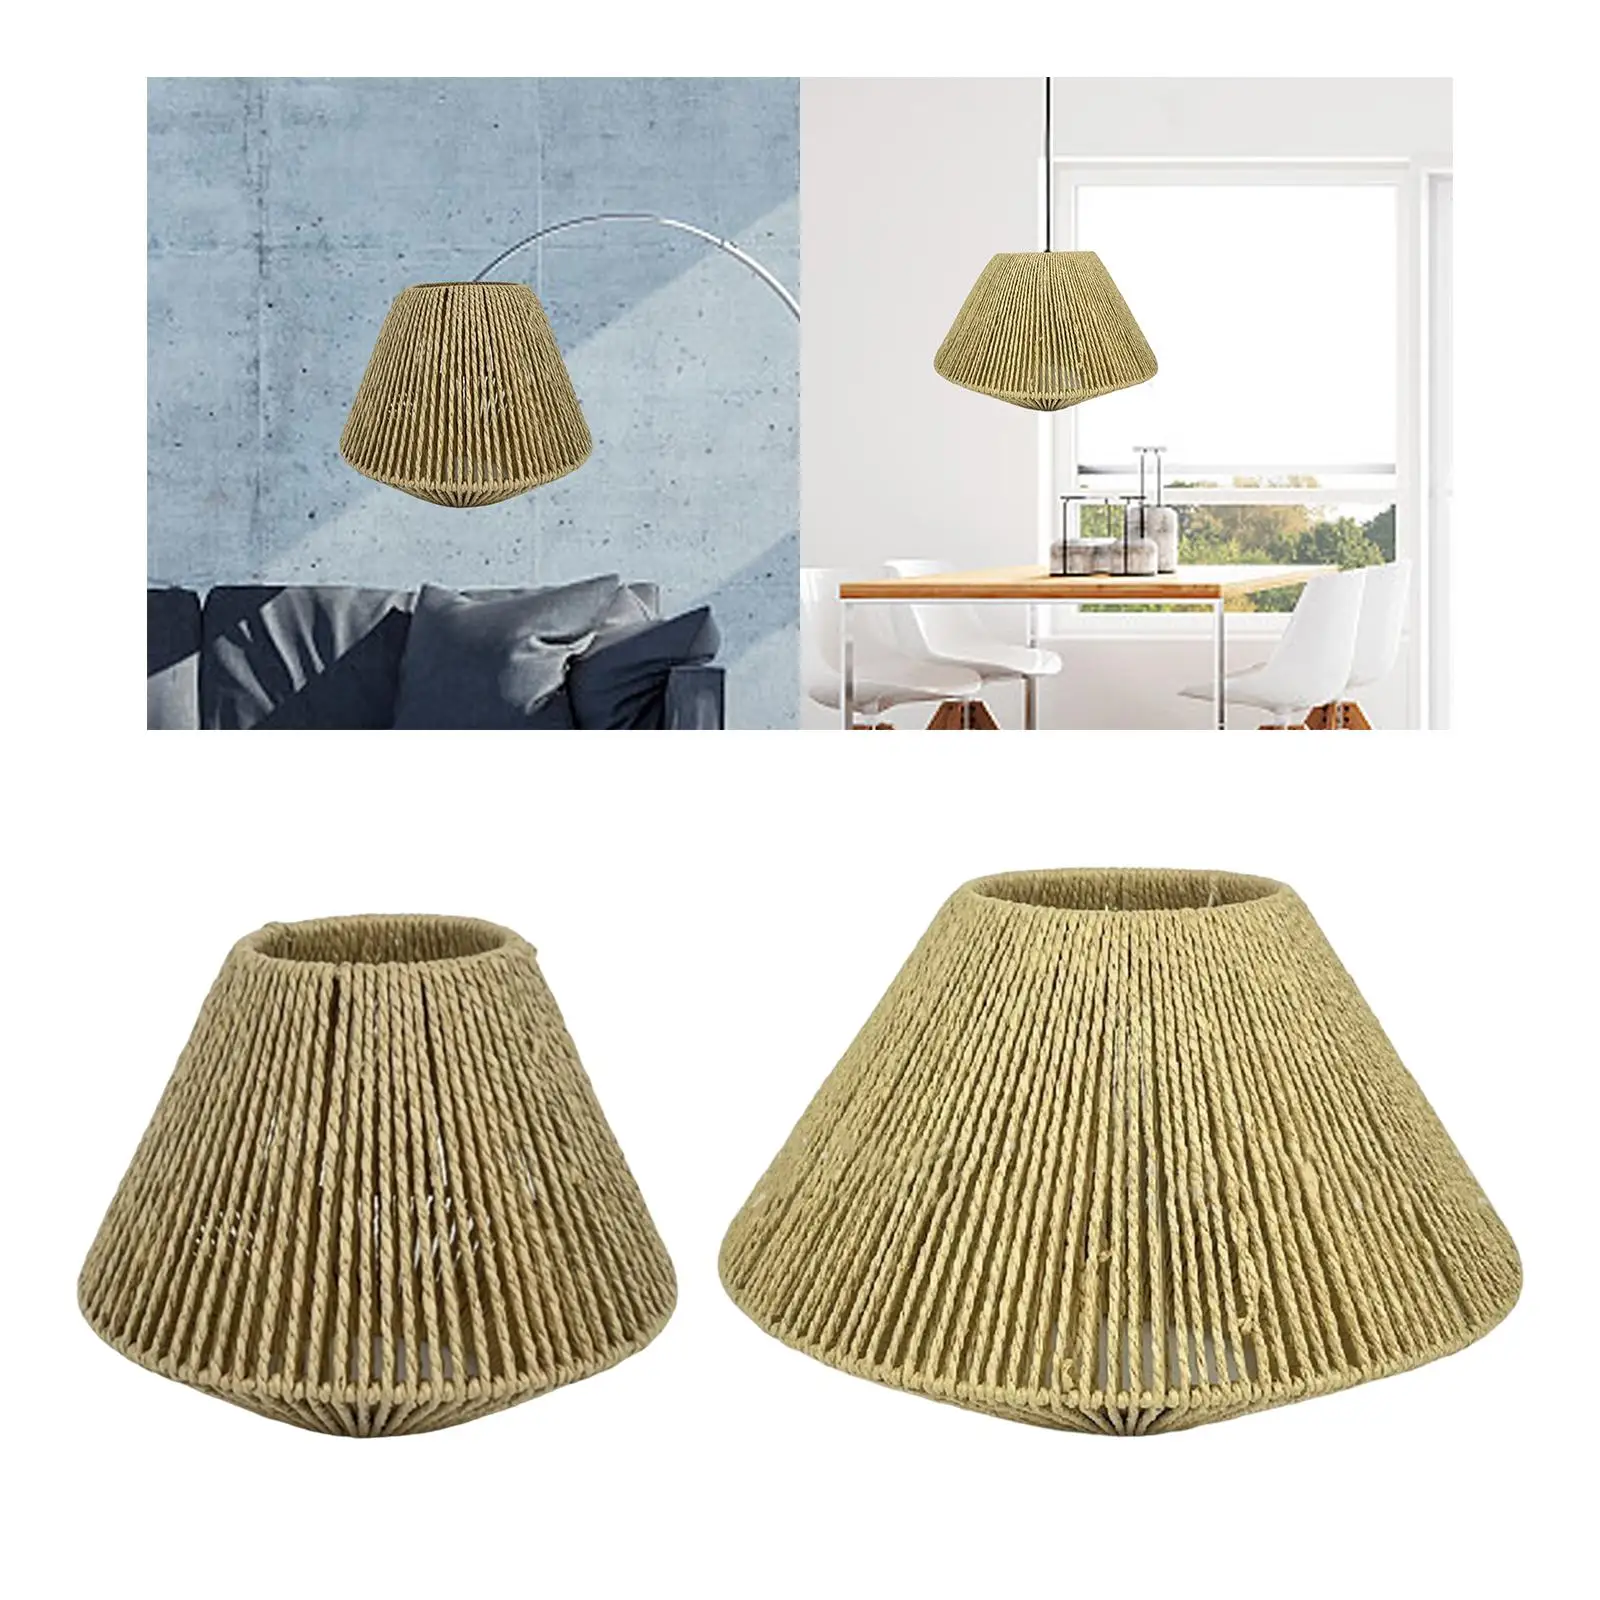 Country Style Chandelier Cover Pendant Light Cover Removable Handwoven Lampshade for Teahouse Living Room Bedroom Bar Decoration